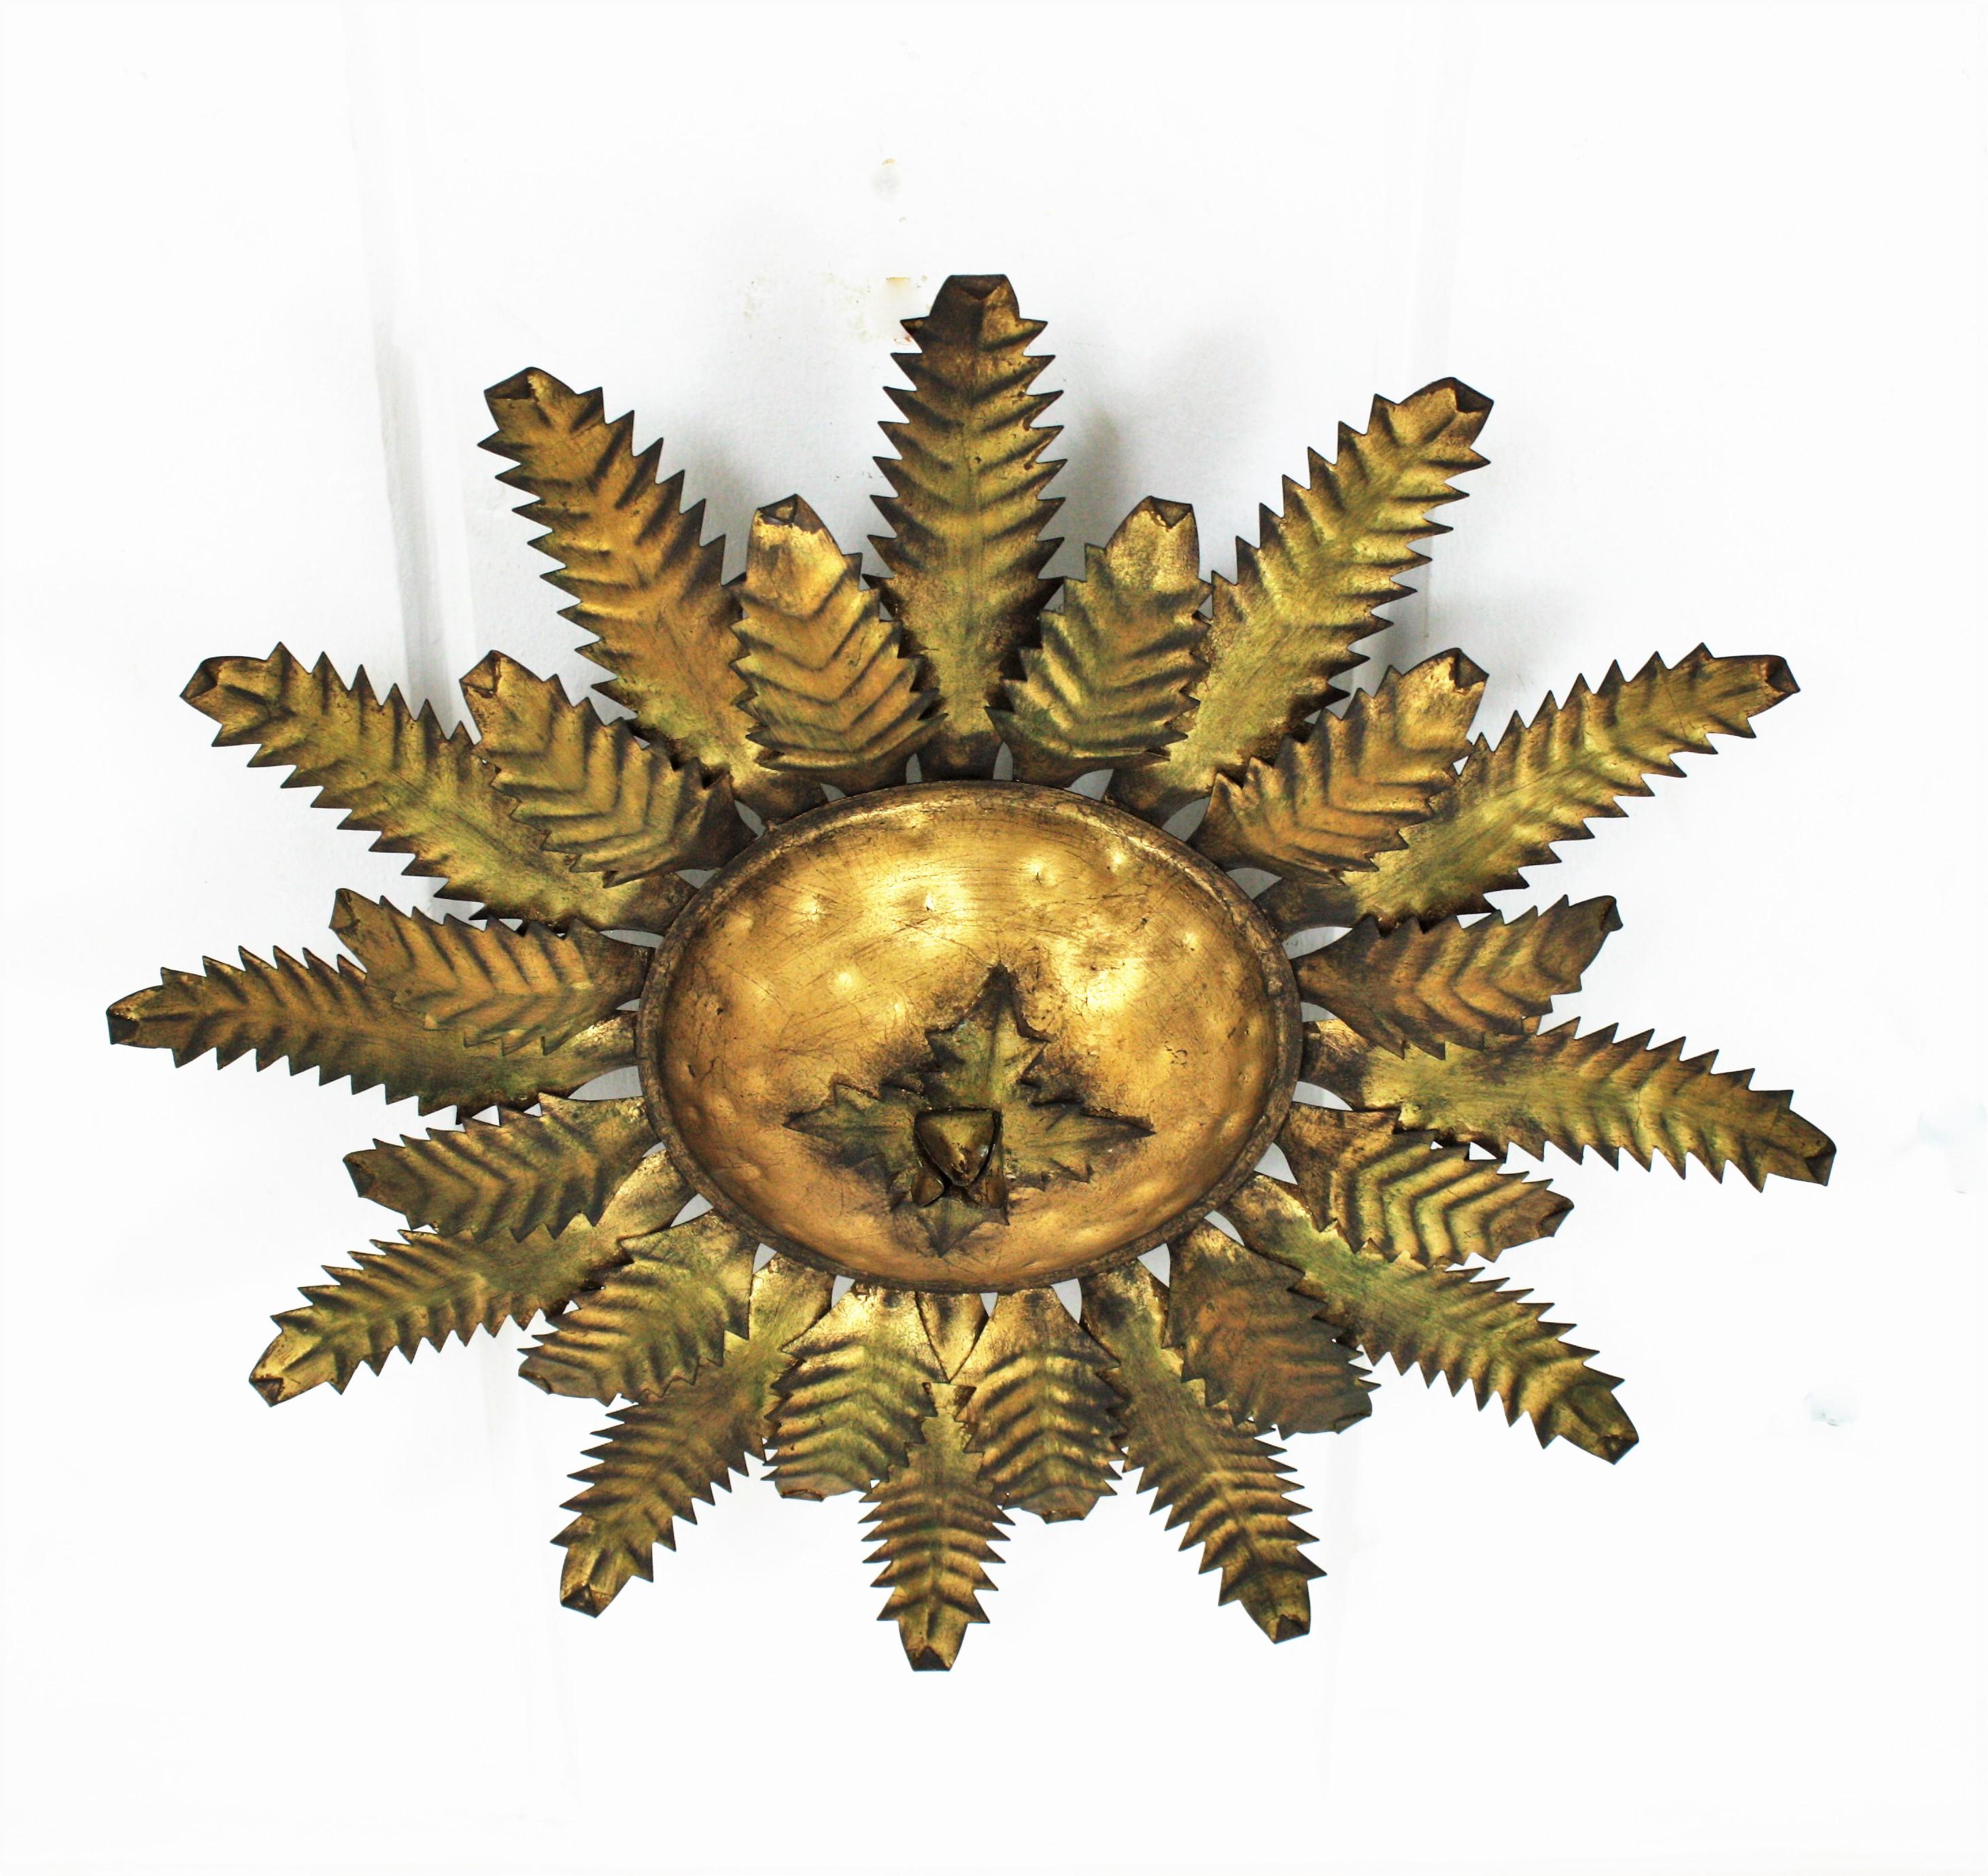 Gold leaf gilt hand-hammered iron sunburst light fixture from the Brutalist period. Spain, 1950s.
Richly decorated with the hammer marks at the central sphere. Two layers of alternating short and long scalloped leaves and a central floral foliage